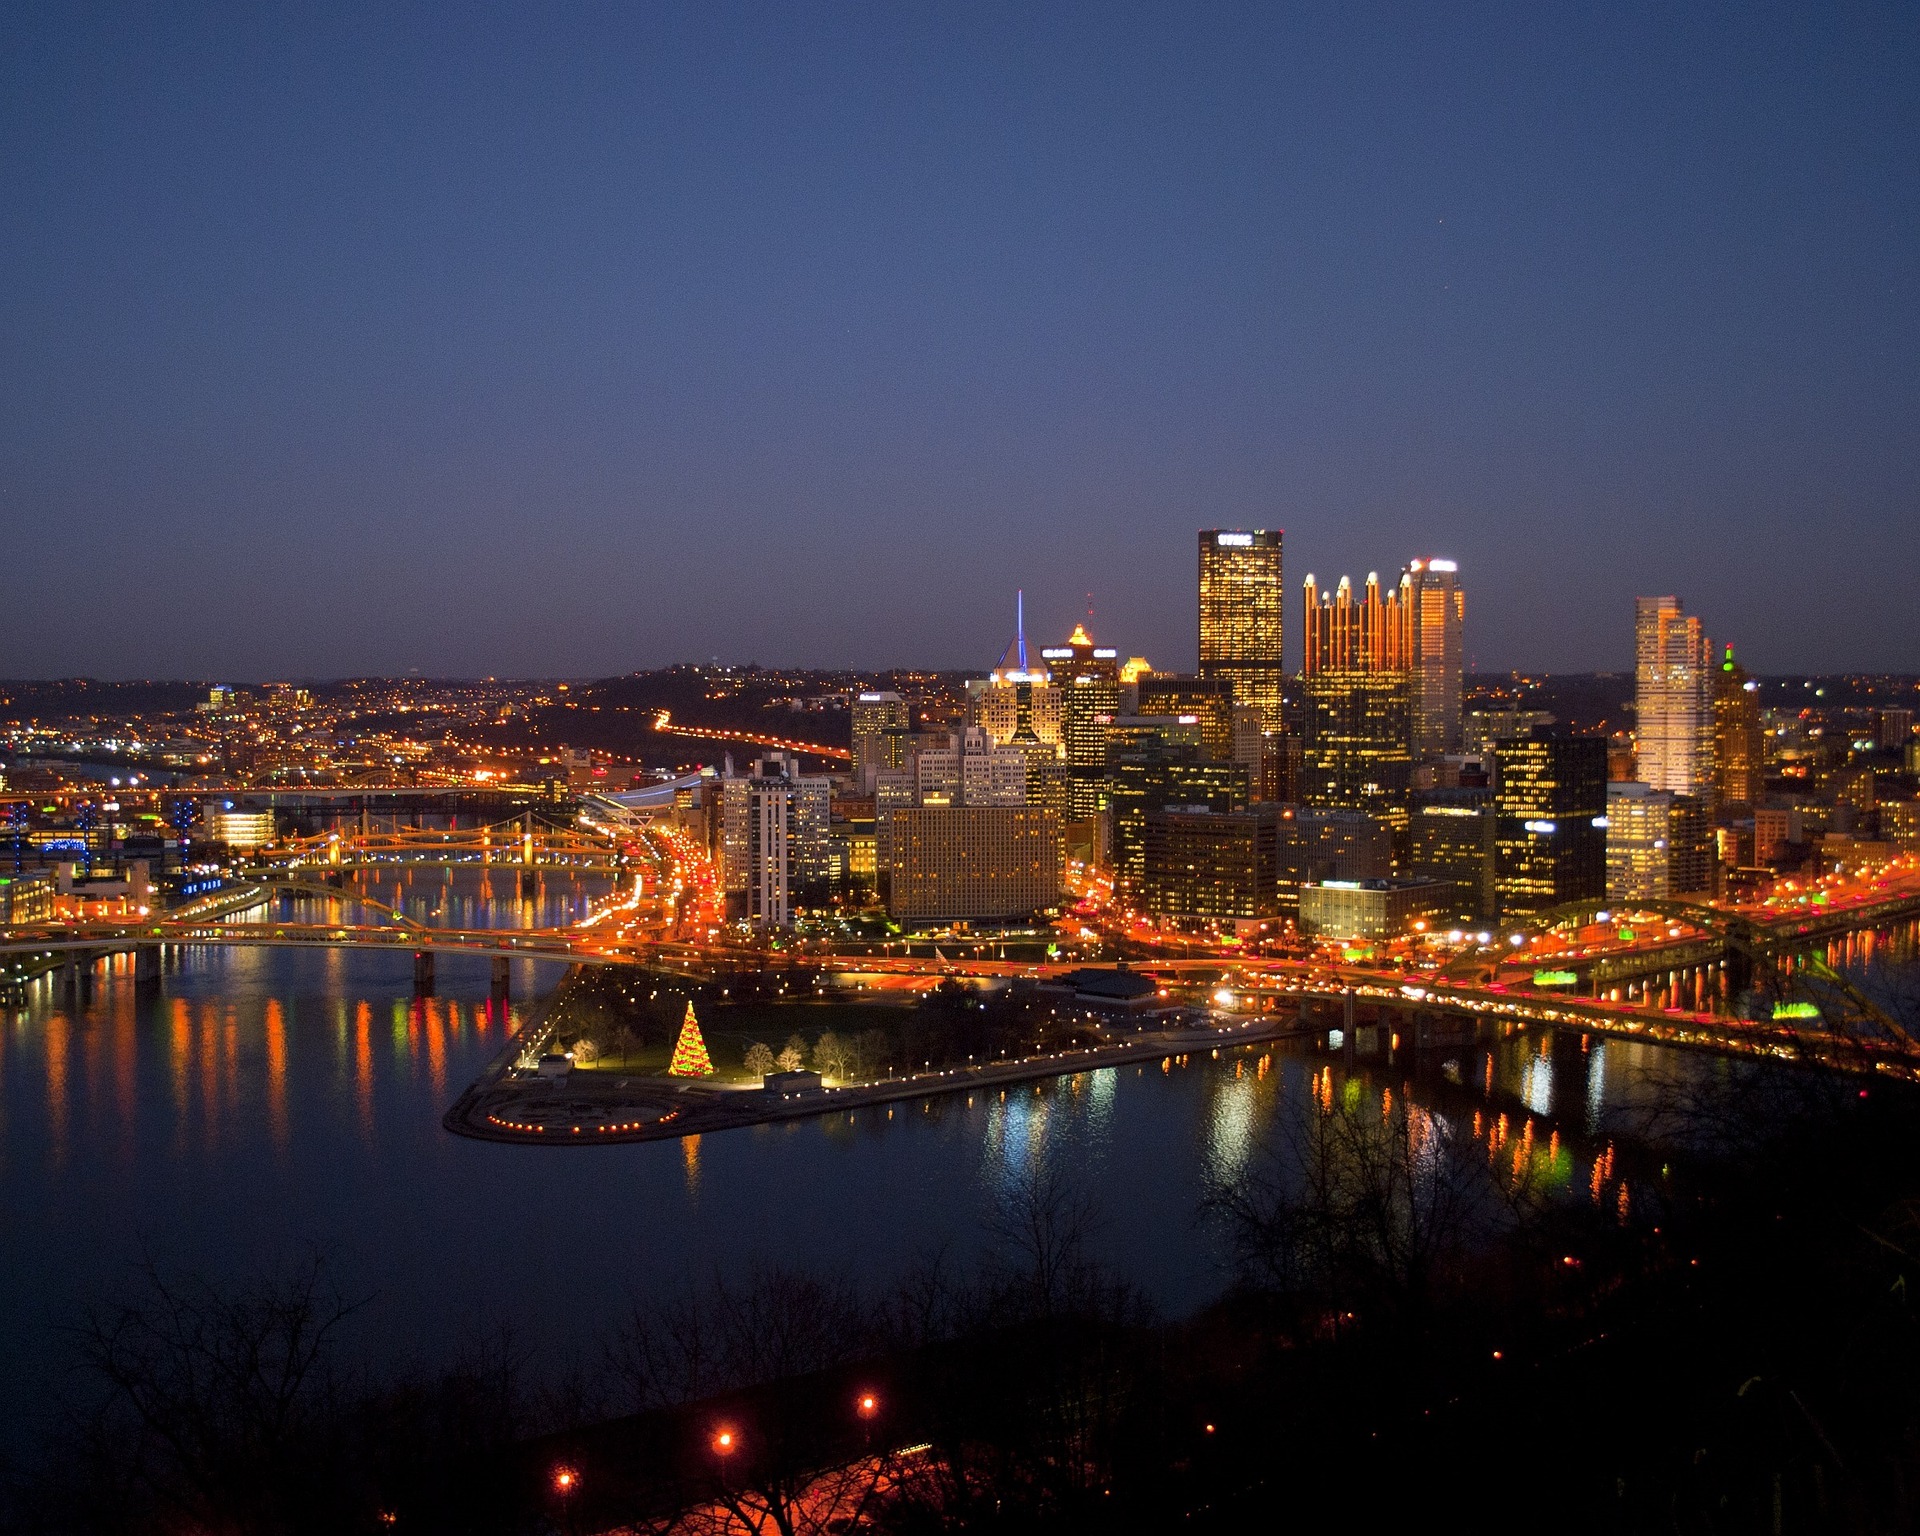 Check out our 2019 market analysis of Pittsburgh, Pennsylvania, and why we're so bullish on Steel City.